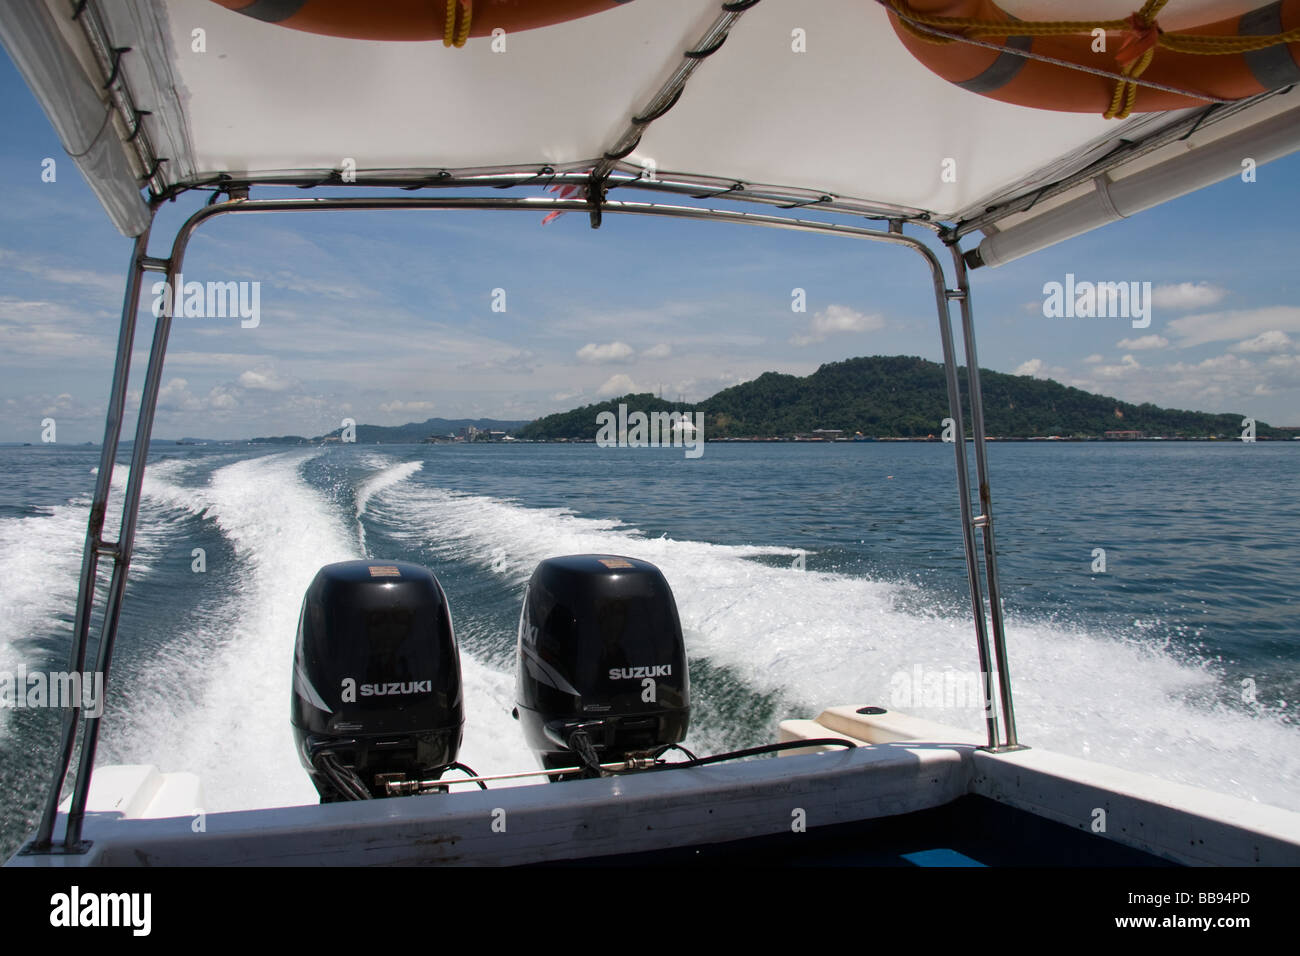 A view of the back of a speed boat wake with the island of Borneo